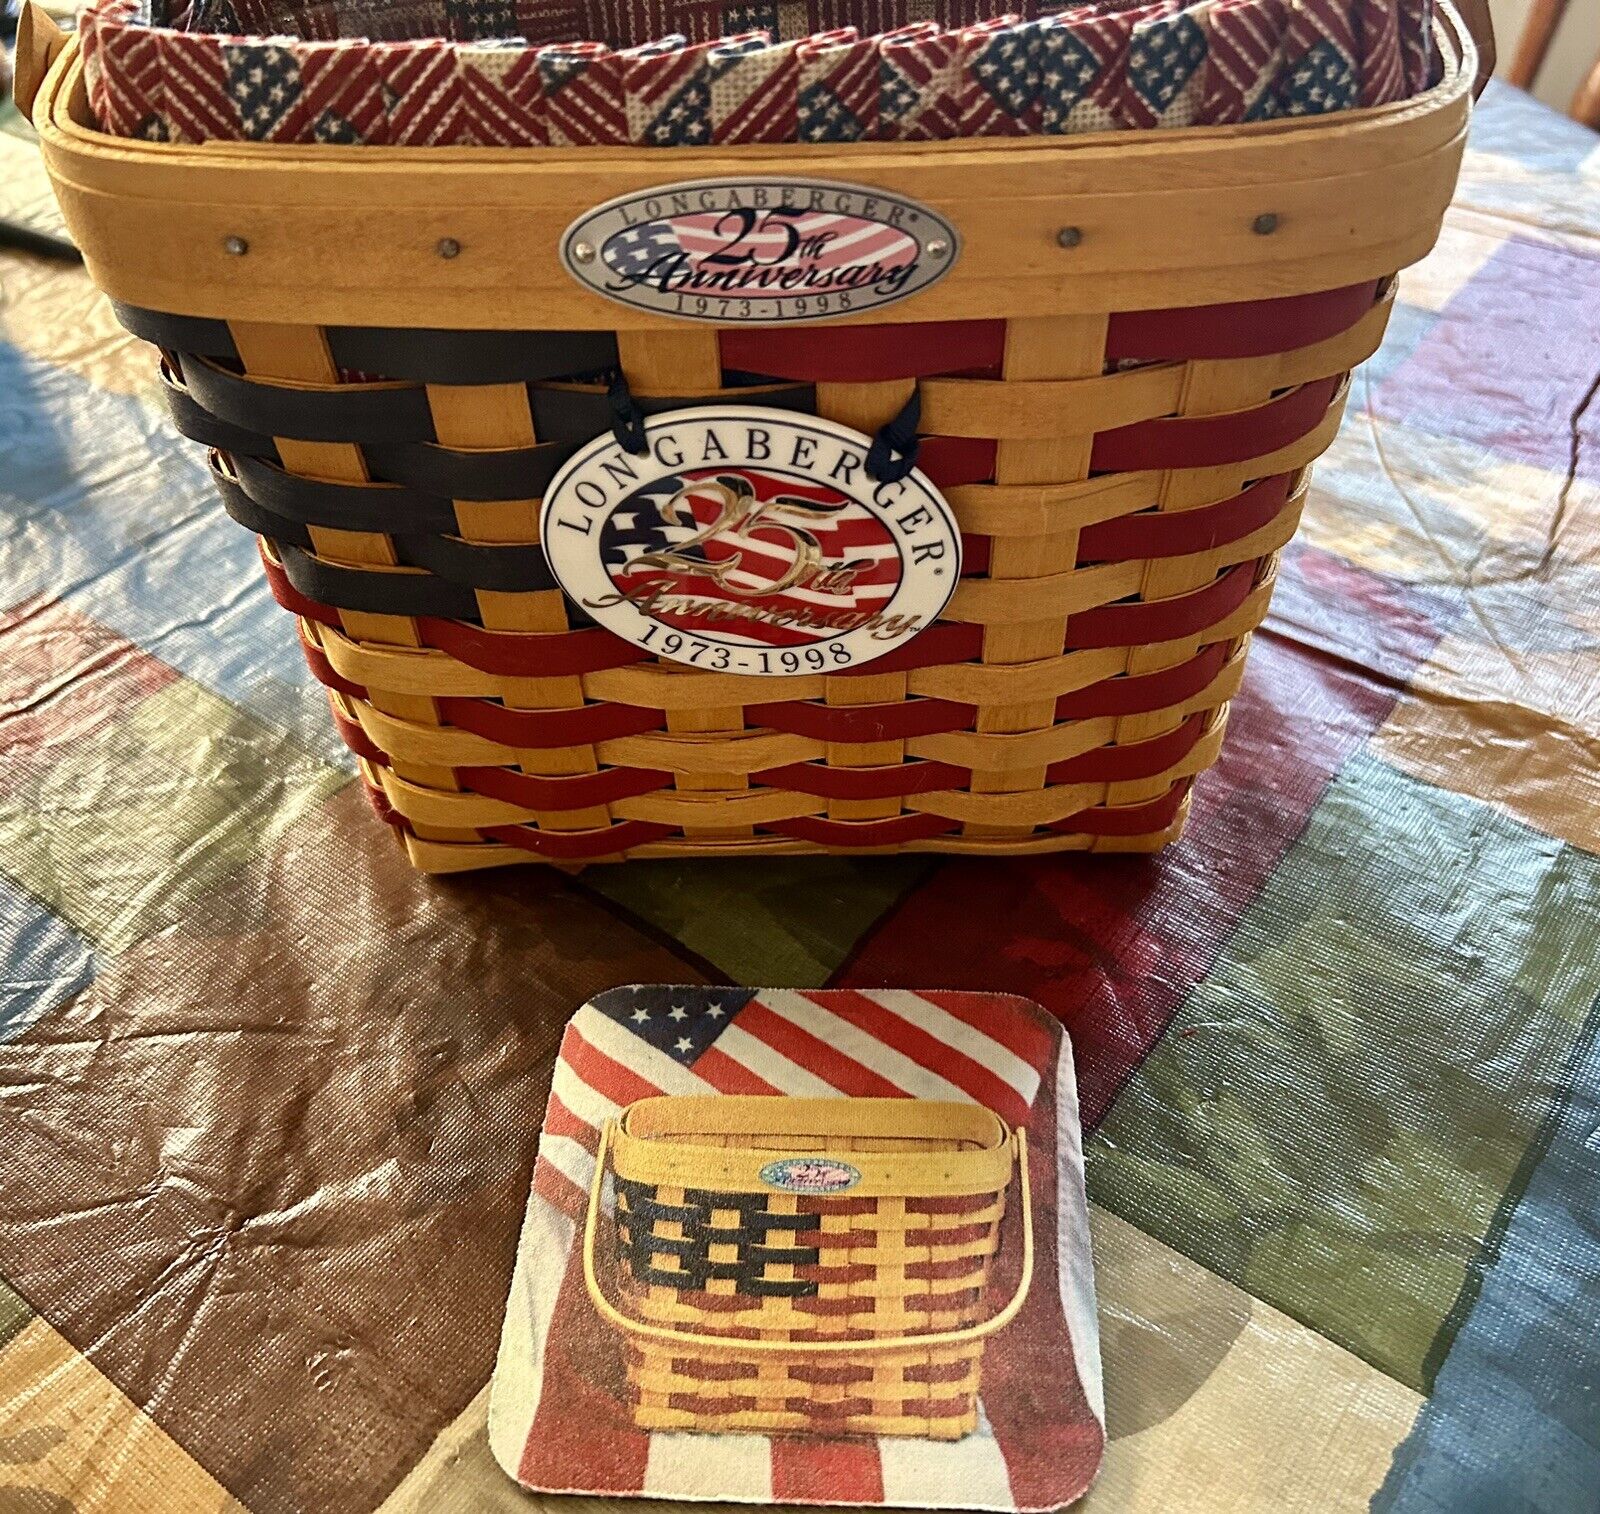 1998 Longaberger 25th Anniversary Join Our Celebration Basket Liner & Protector